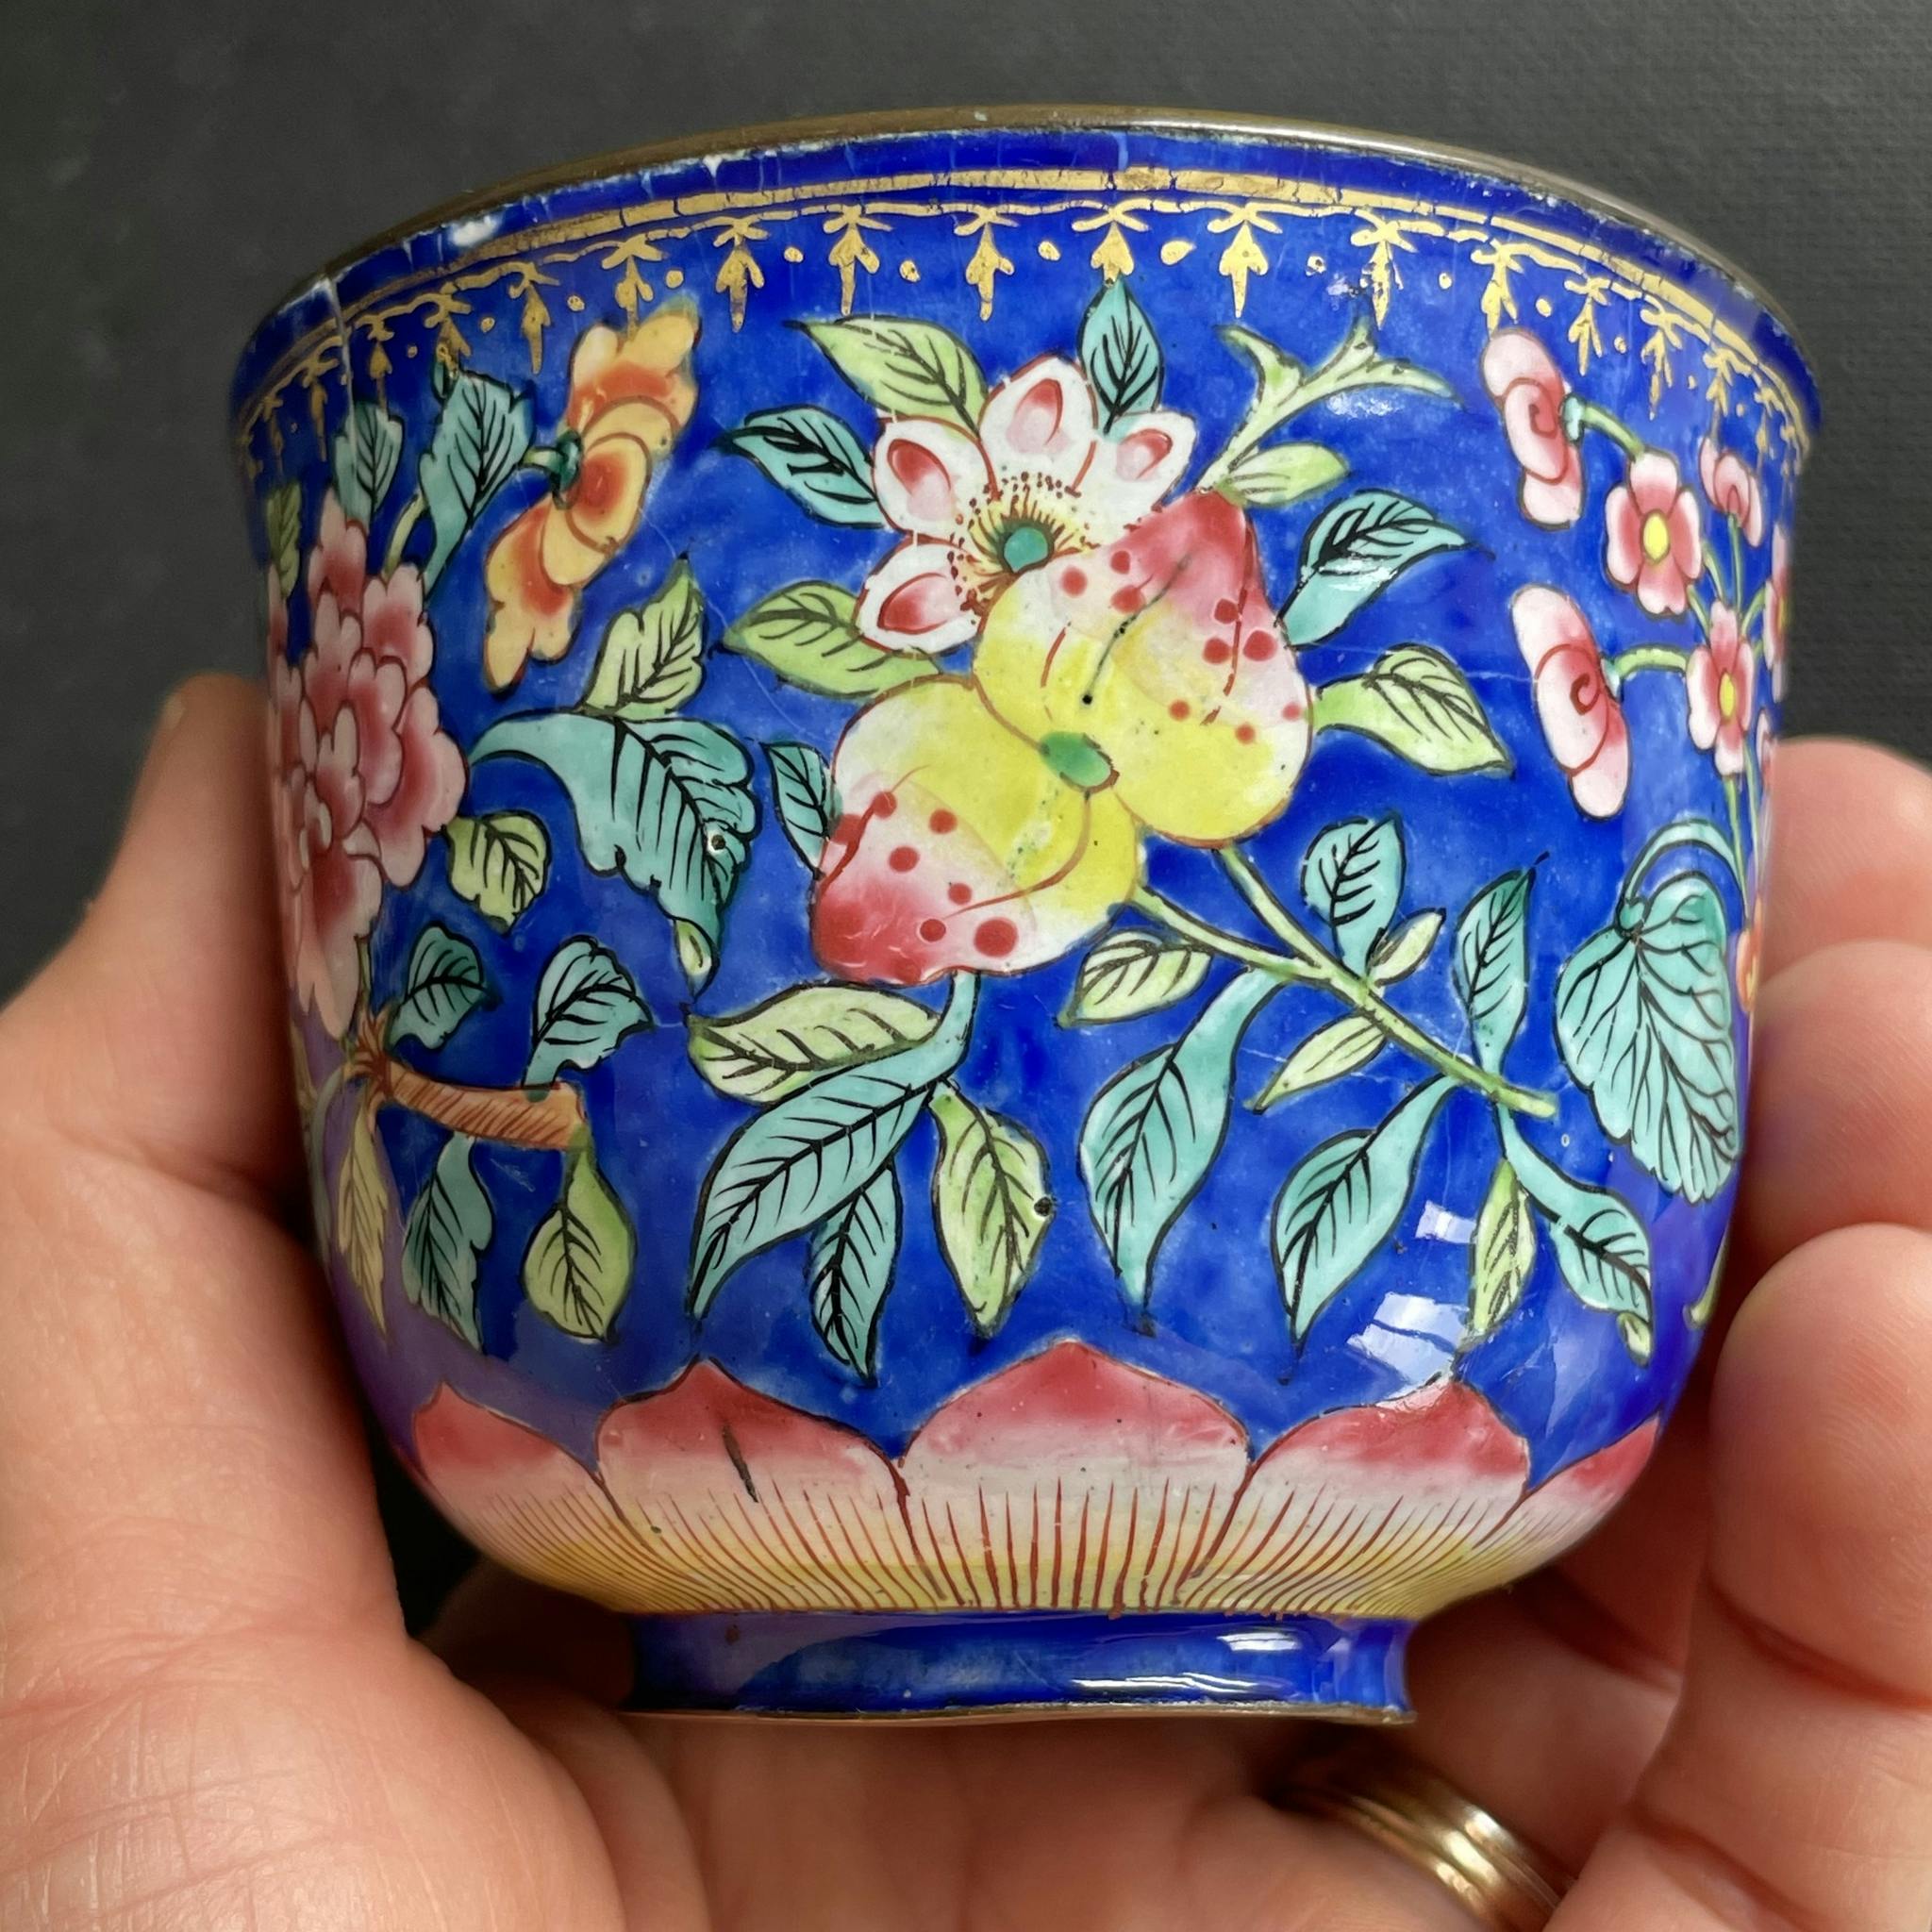 Antique Chinese Canton Hand Painted Enamel teacup with saucer, 19th c #1467